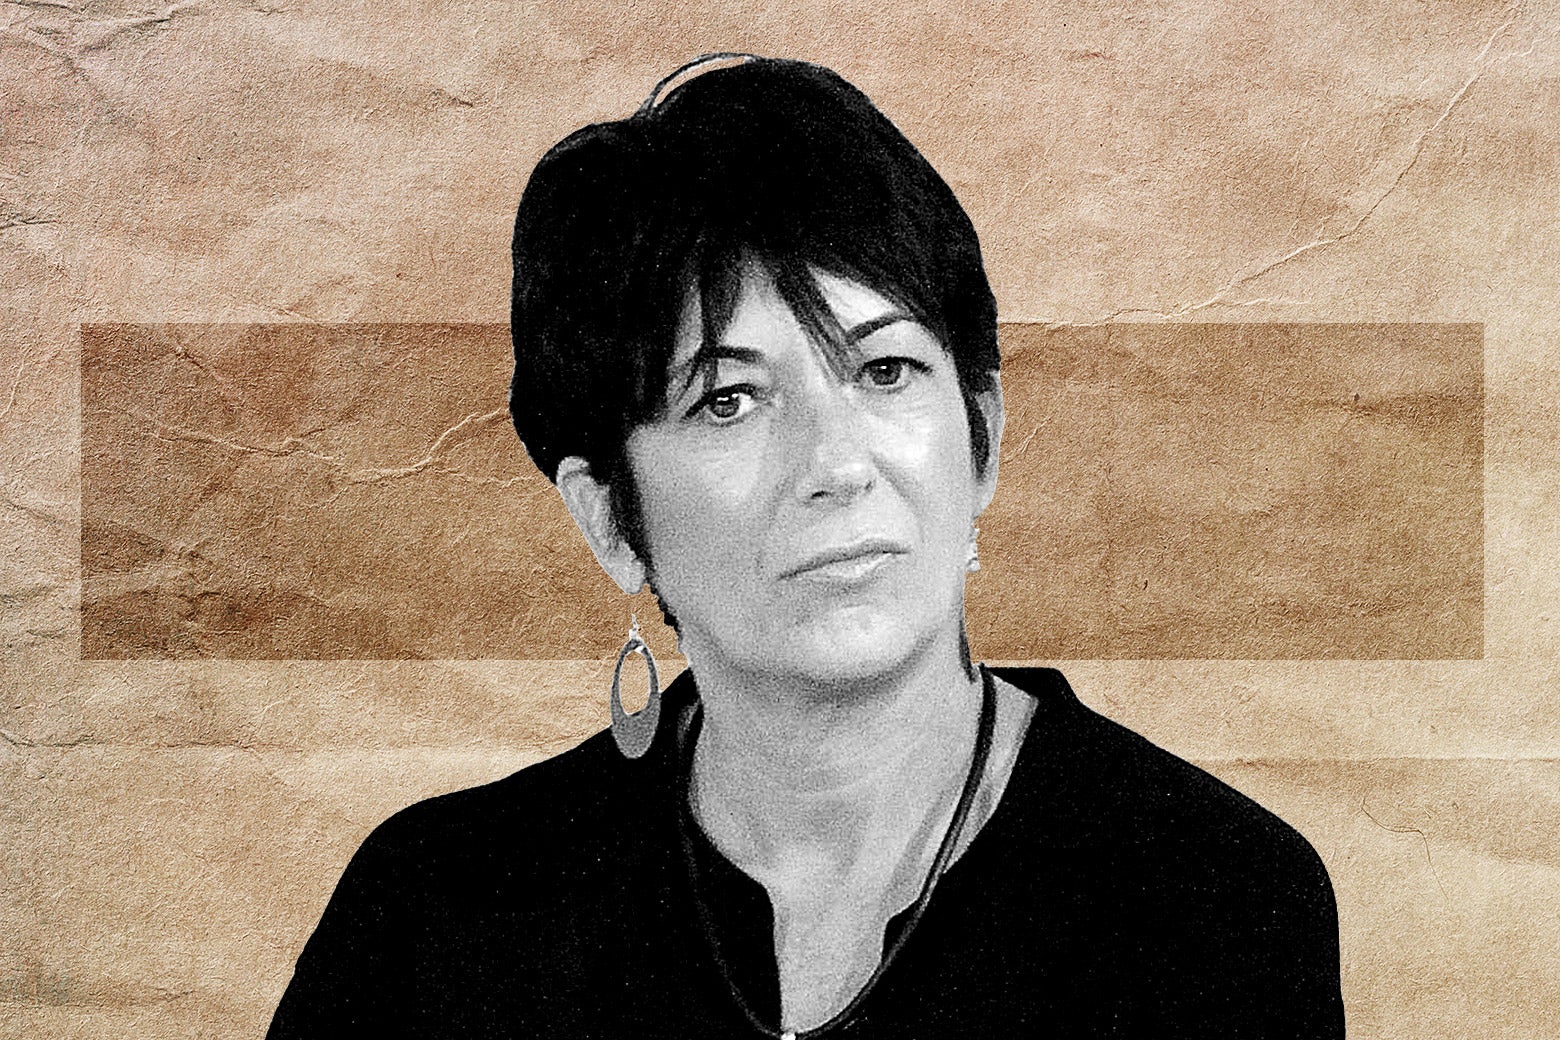 A solemn Ghislaine Maxwell against the backdrop of crumbled brown paper.